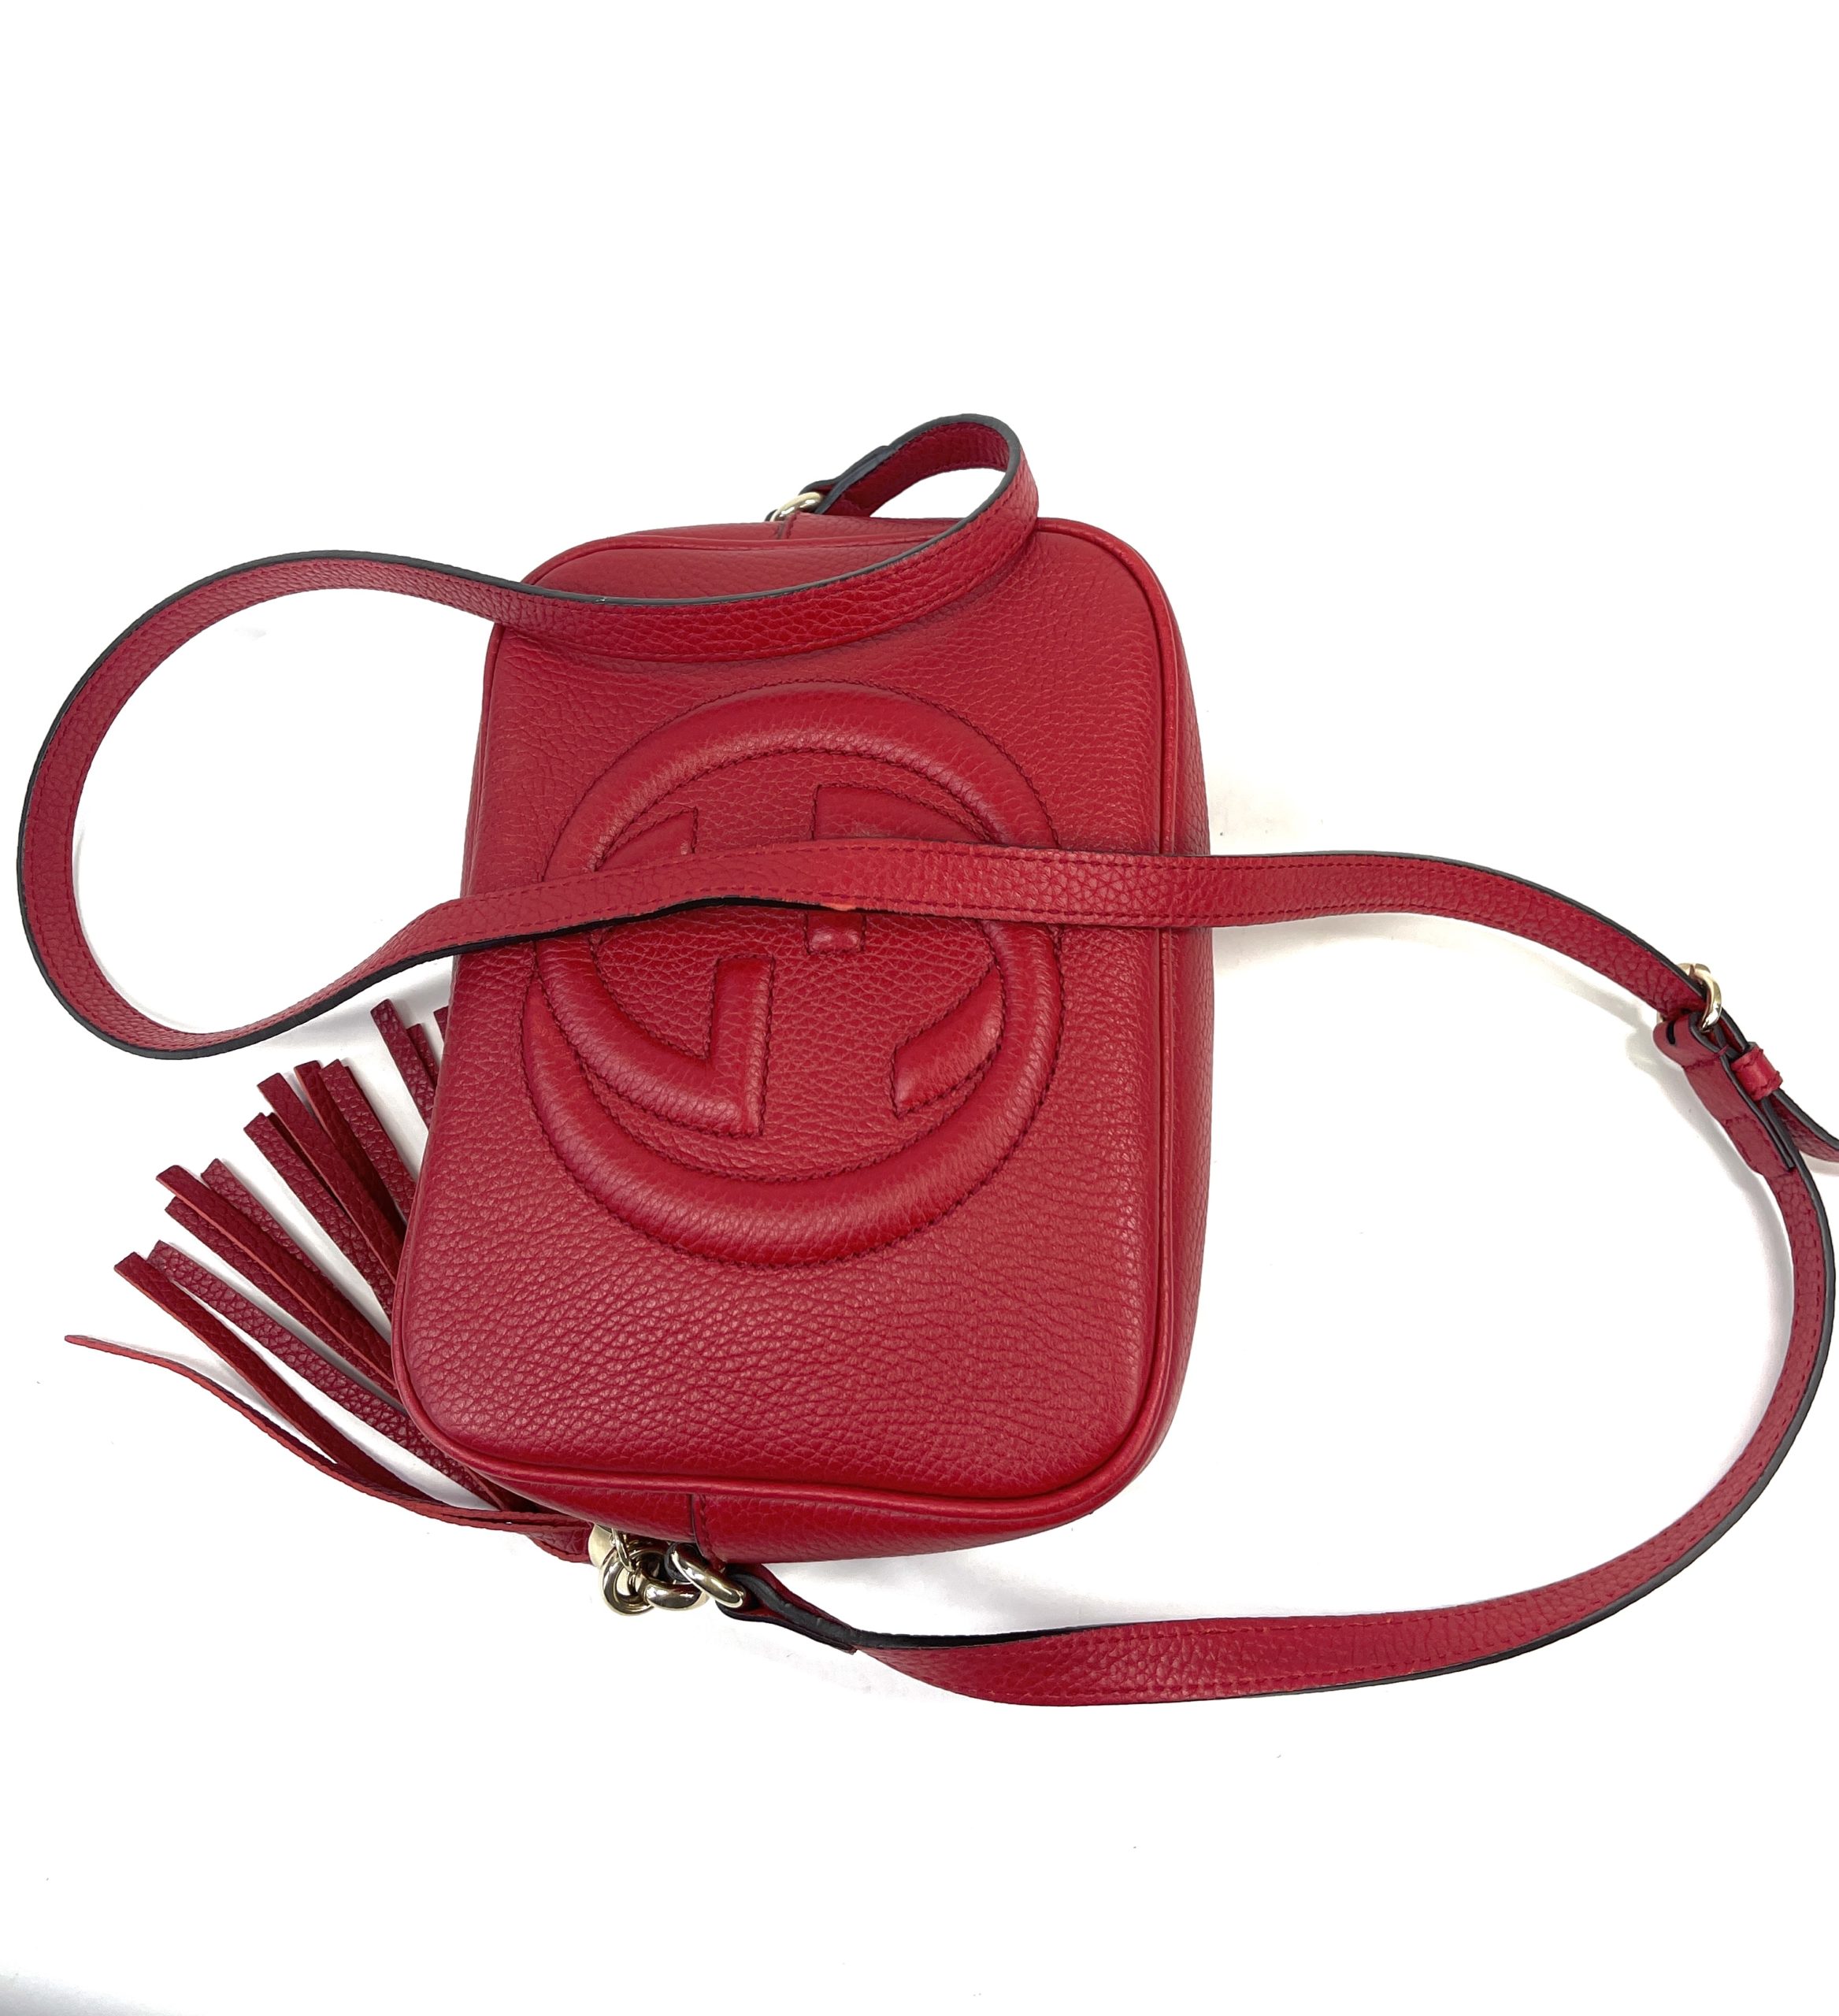 Gucci Soho Disco Pebbled Calfskin Small Tabasco Red Leather Cross Body -  MyDesignerly